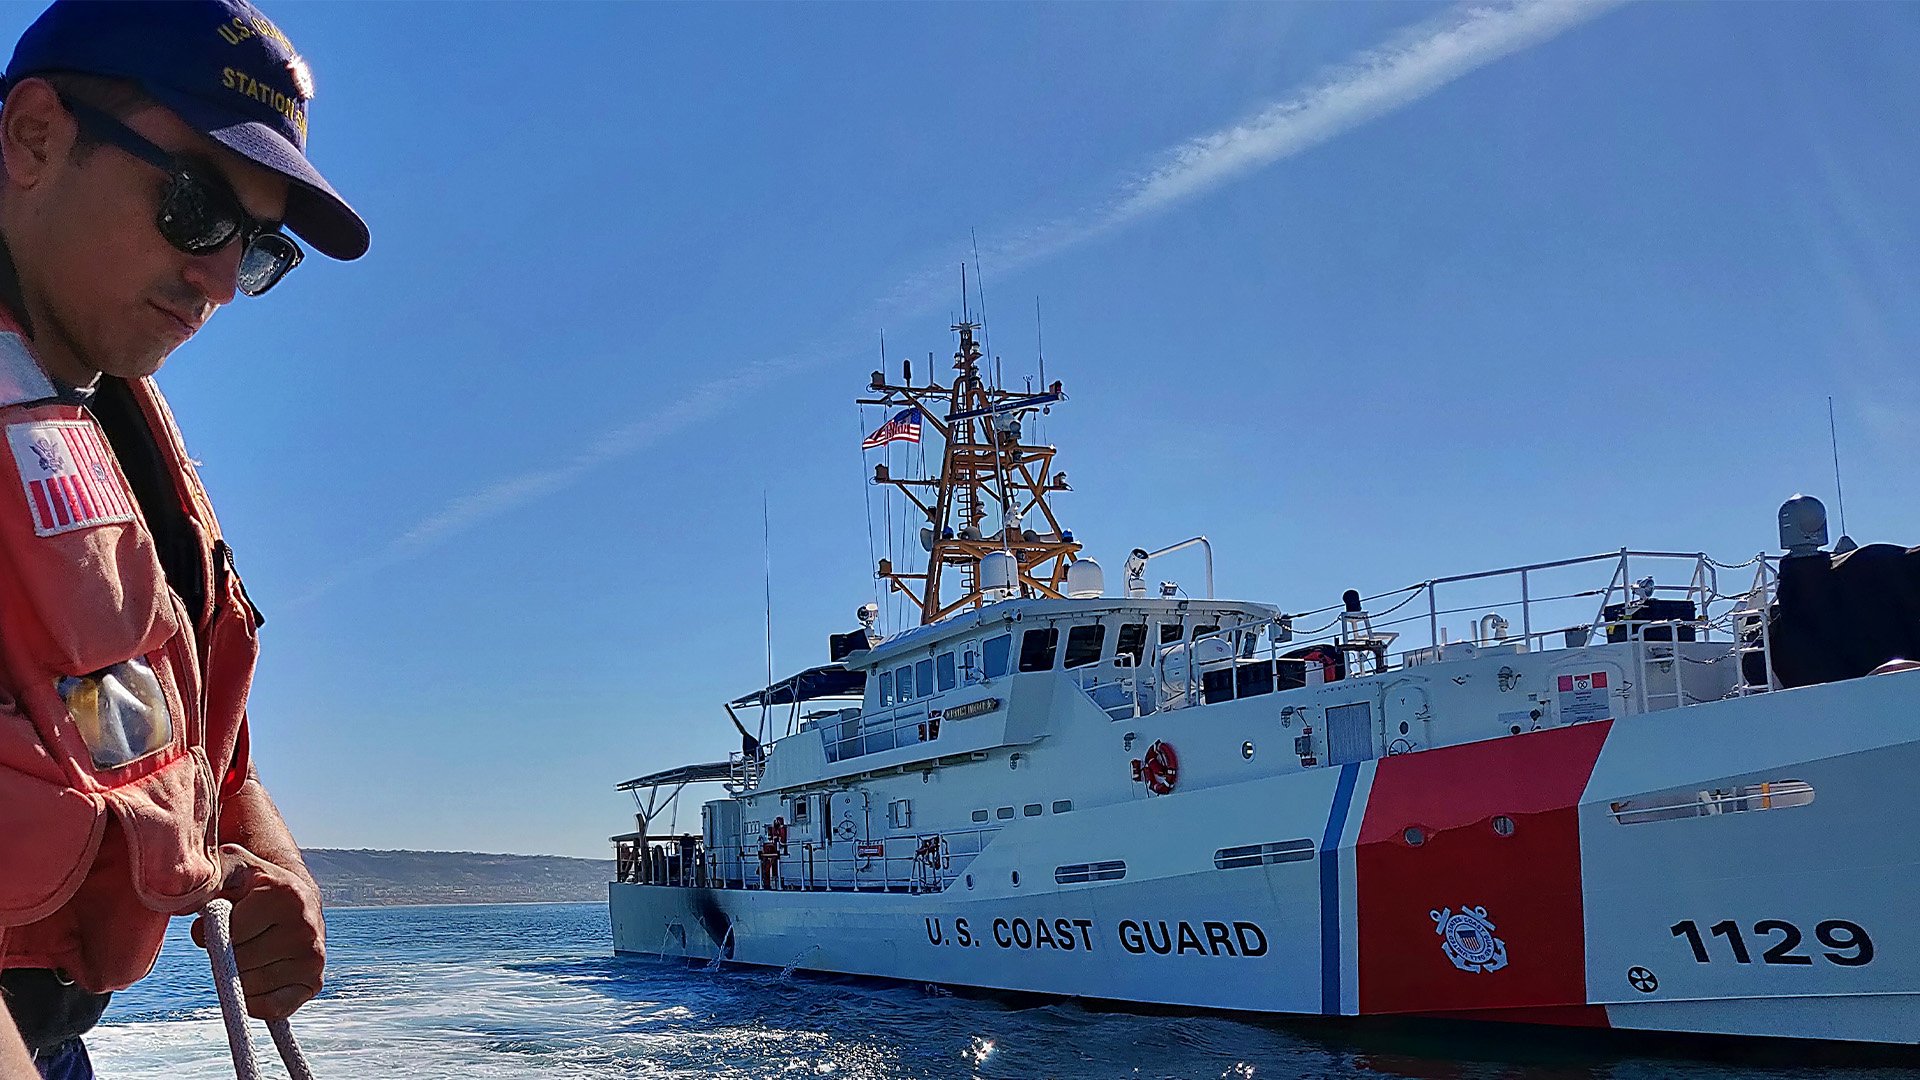 A US Coast Guard fireman ties off a fender on board a Coast Guard Station San Diego 45-foot Response Boat-Medium, with the cutter Forrest Rednour in the background, off the coast of California on Nov. 27, 2018. The crew of the Rednour made the ship's first drug bust during the patrol. US Coast Guard photo.